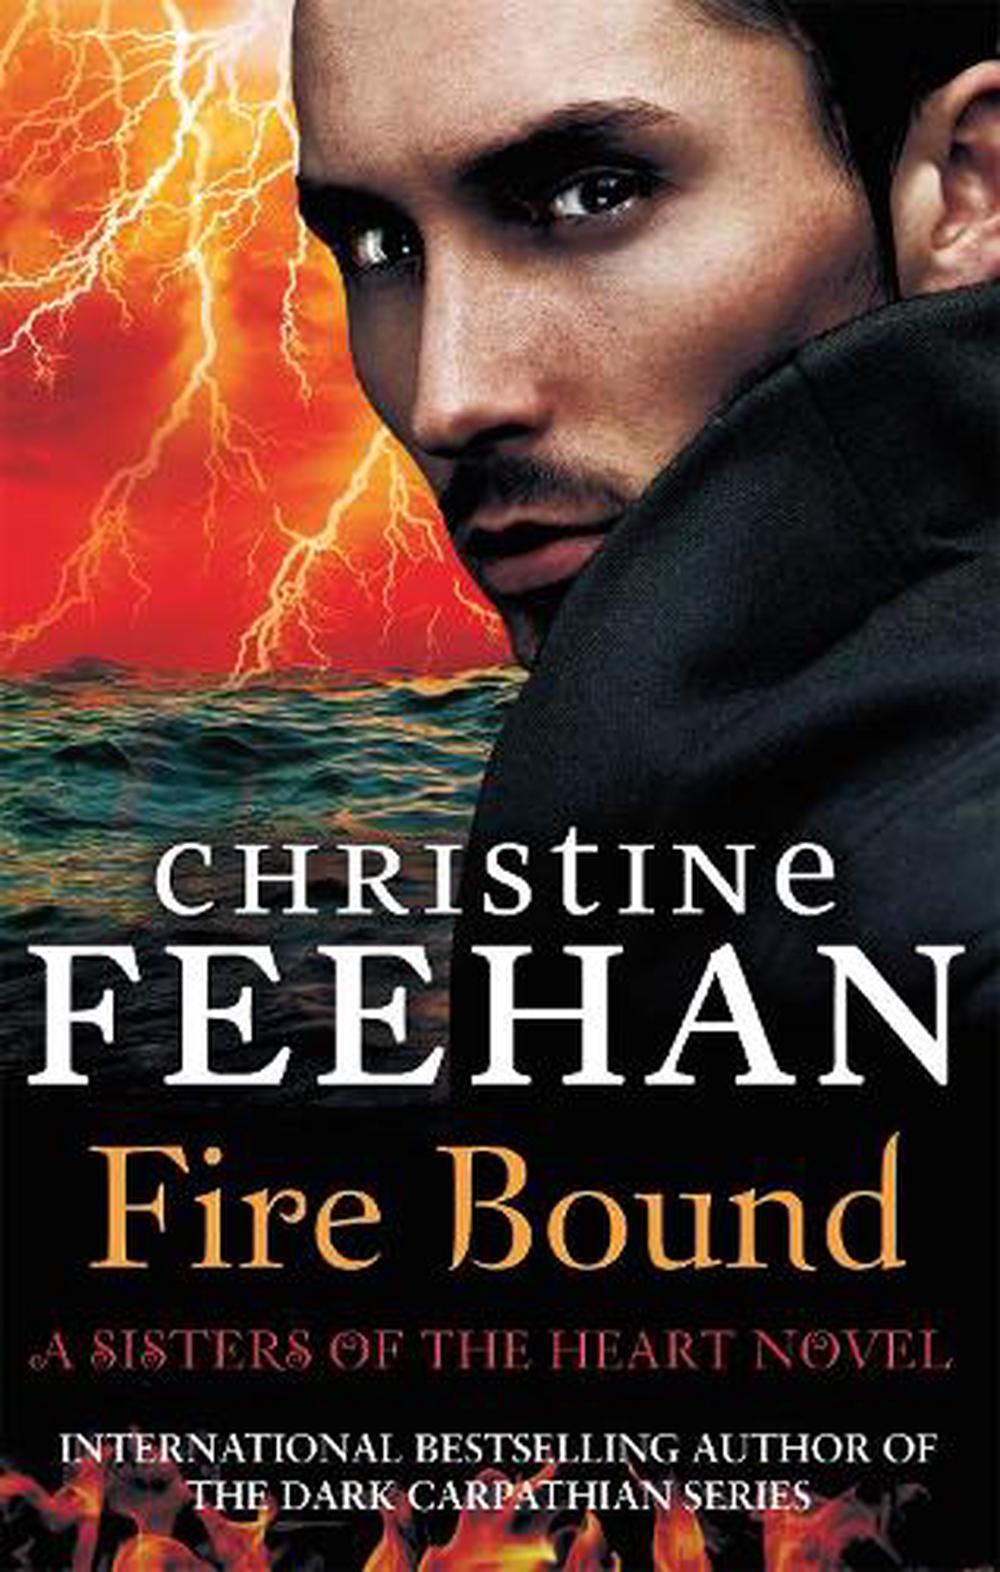 Fire Bound by Christine Feehan, Paperback, 9780349410326 Buy online